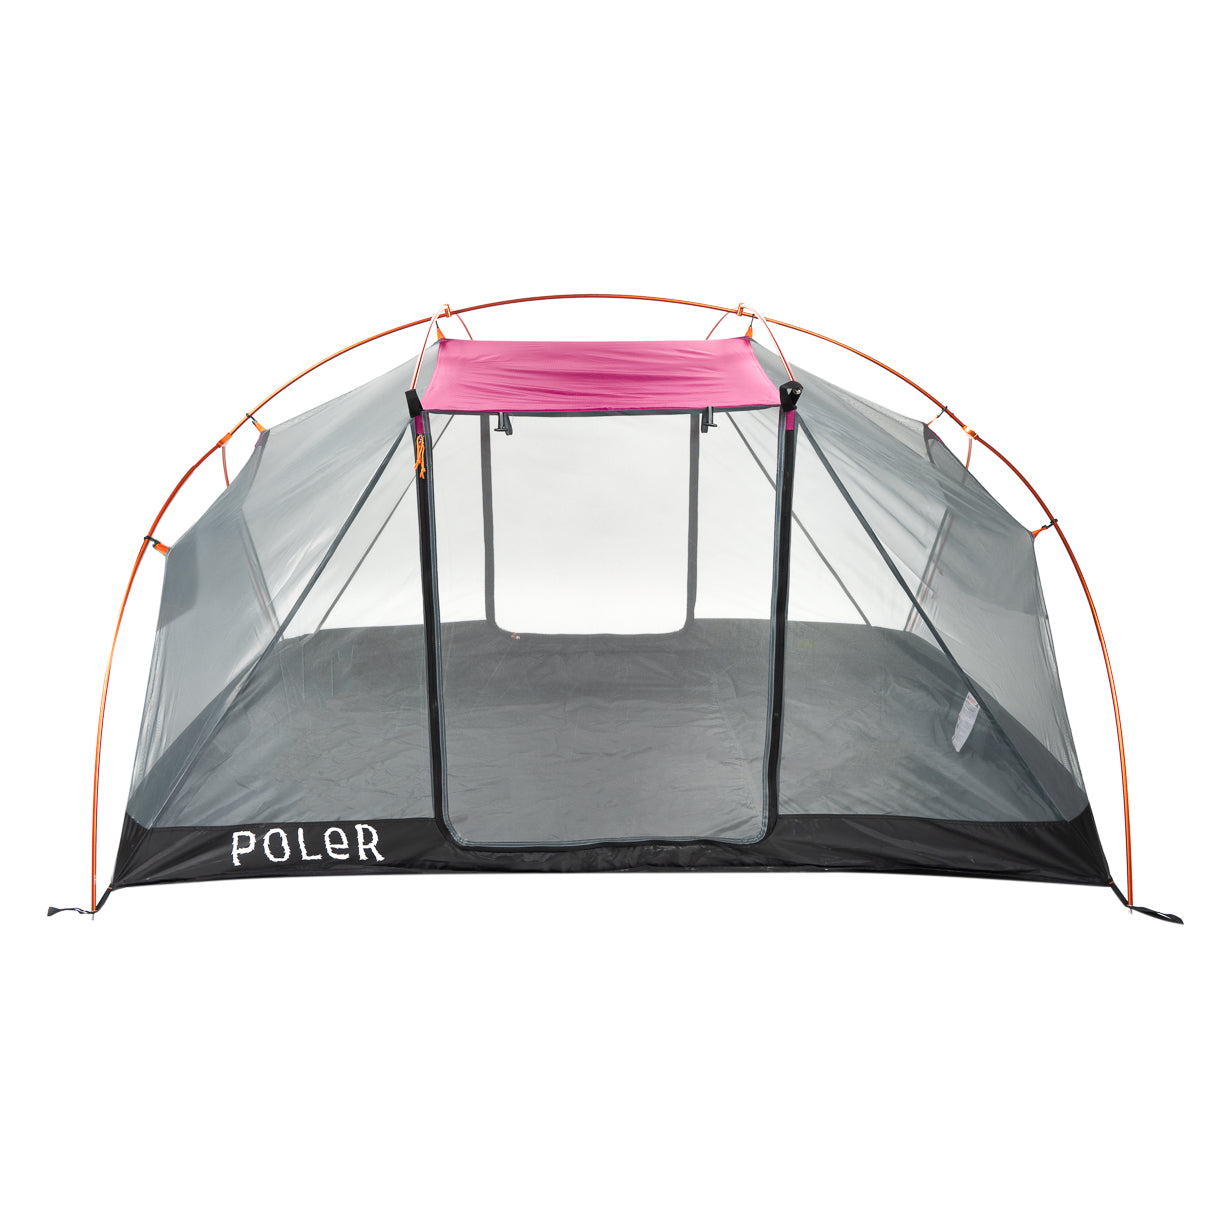 Two Person Tent - 1990 tents   